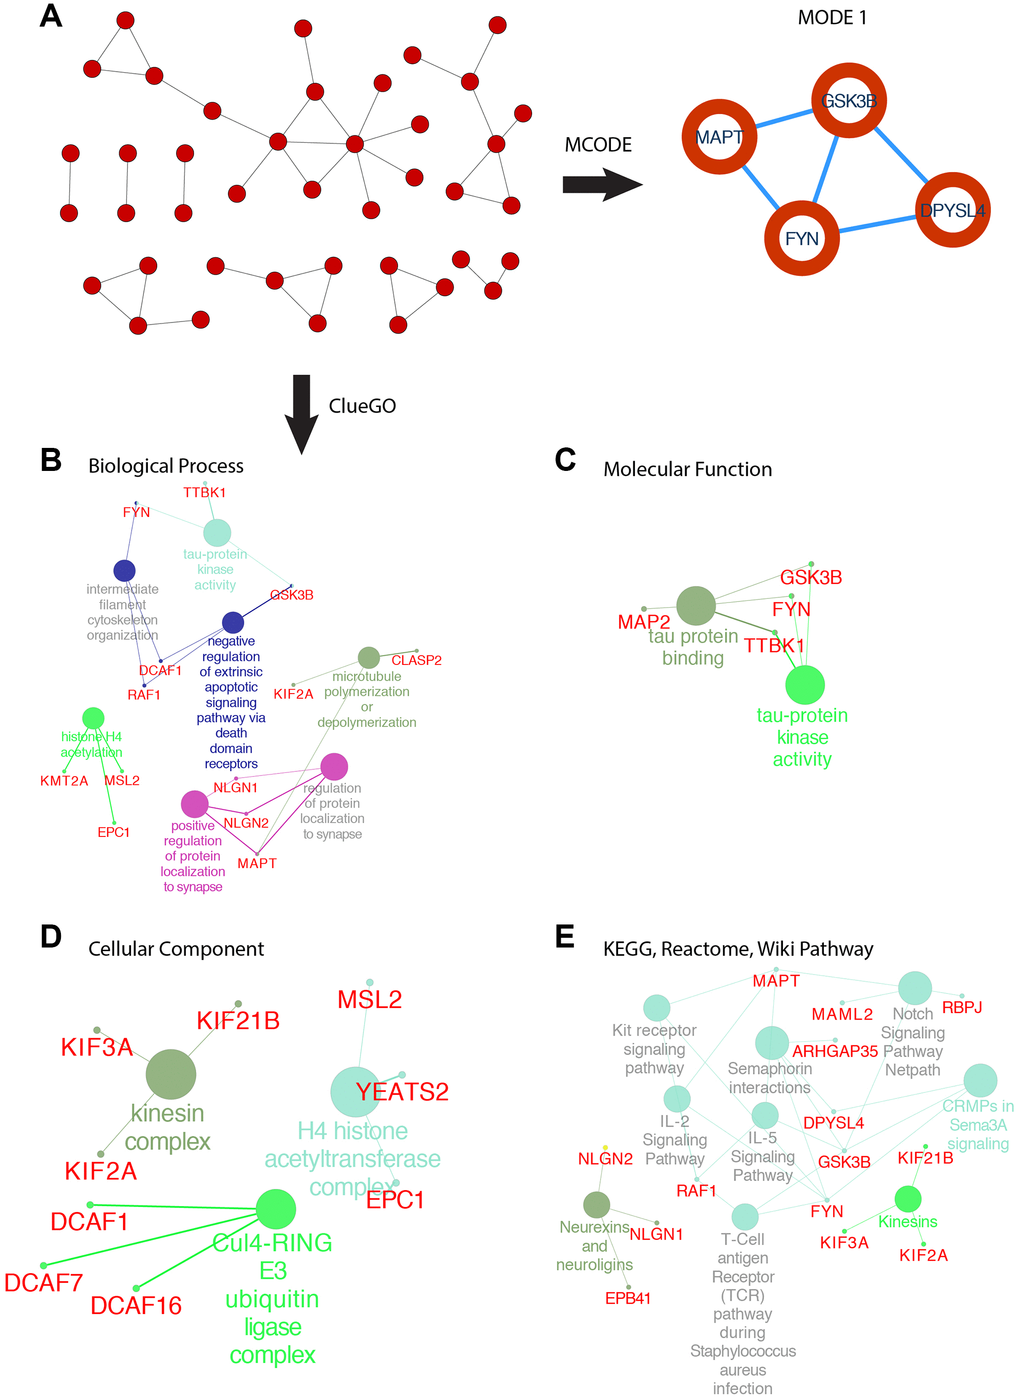 PPI network of SOX6 positive correlation genes and functional analysis of hub genes. (A) PPI network of SOX6 positive correlation genes and hub genes were found by MCODE in Cytoscape. (B) GO enrichment of co-expressed genes in biological process, (C) molecular function, (D) cellular component. (E) KEGG, Reactome, Wiki pathway enrichment analyses by ClueGO in Cytoscape.